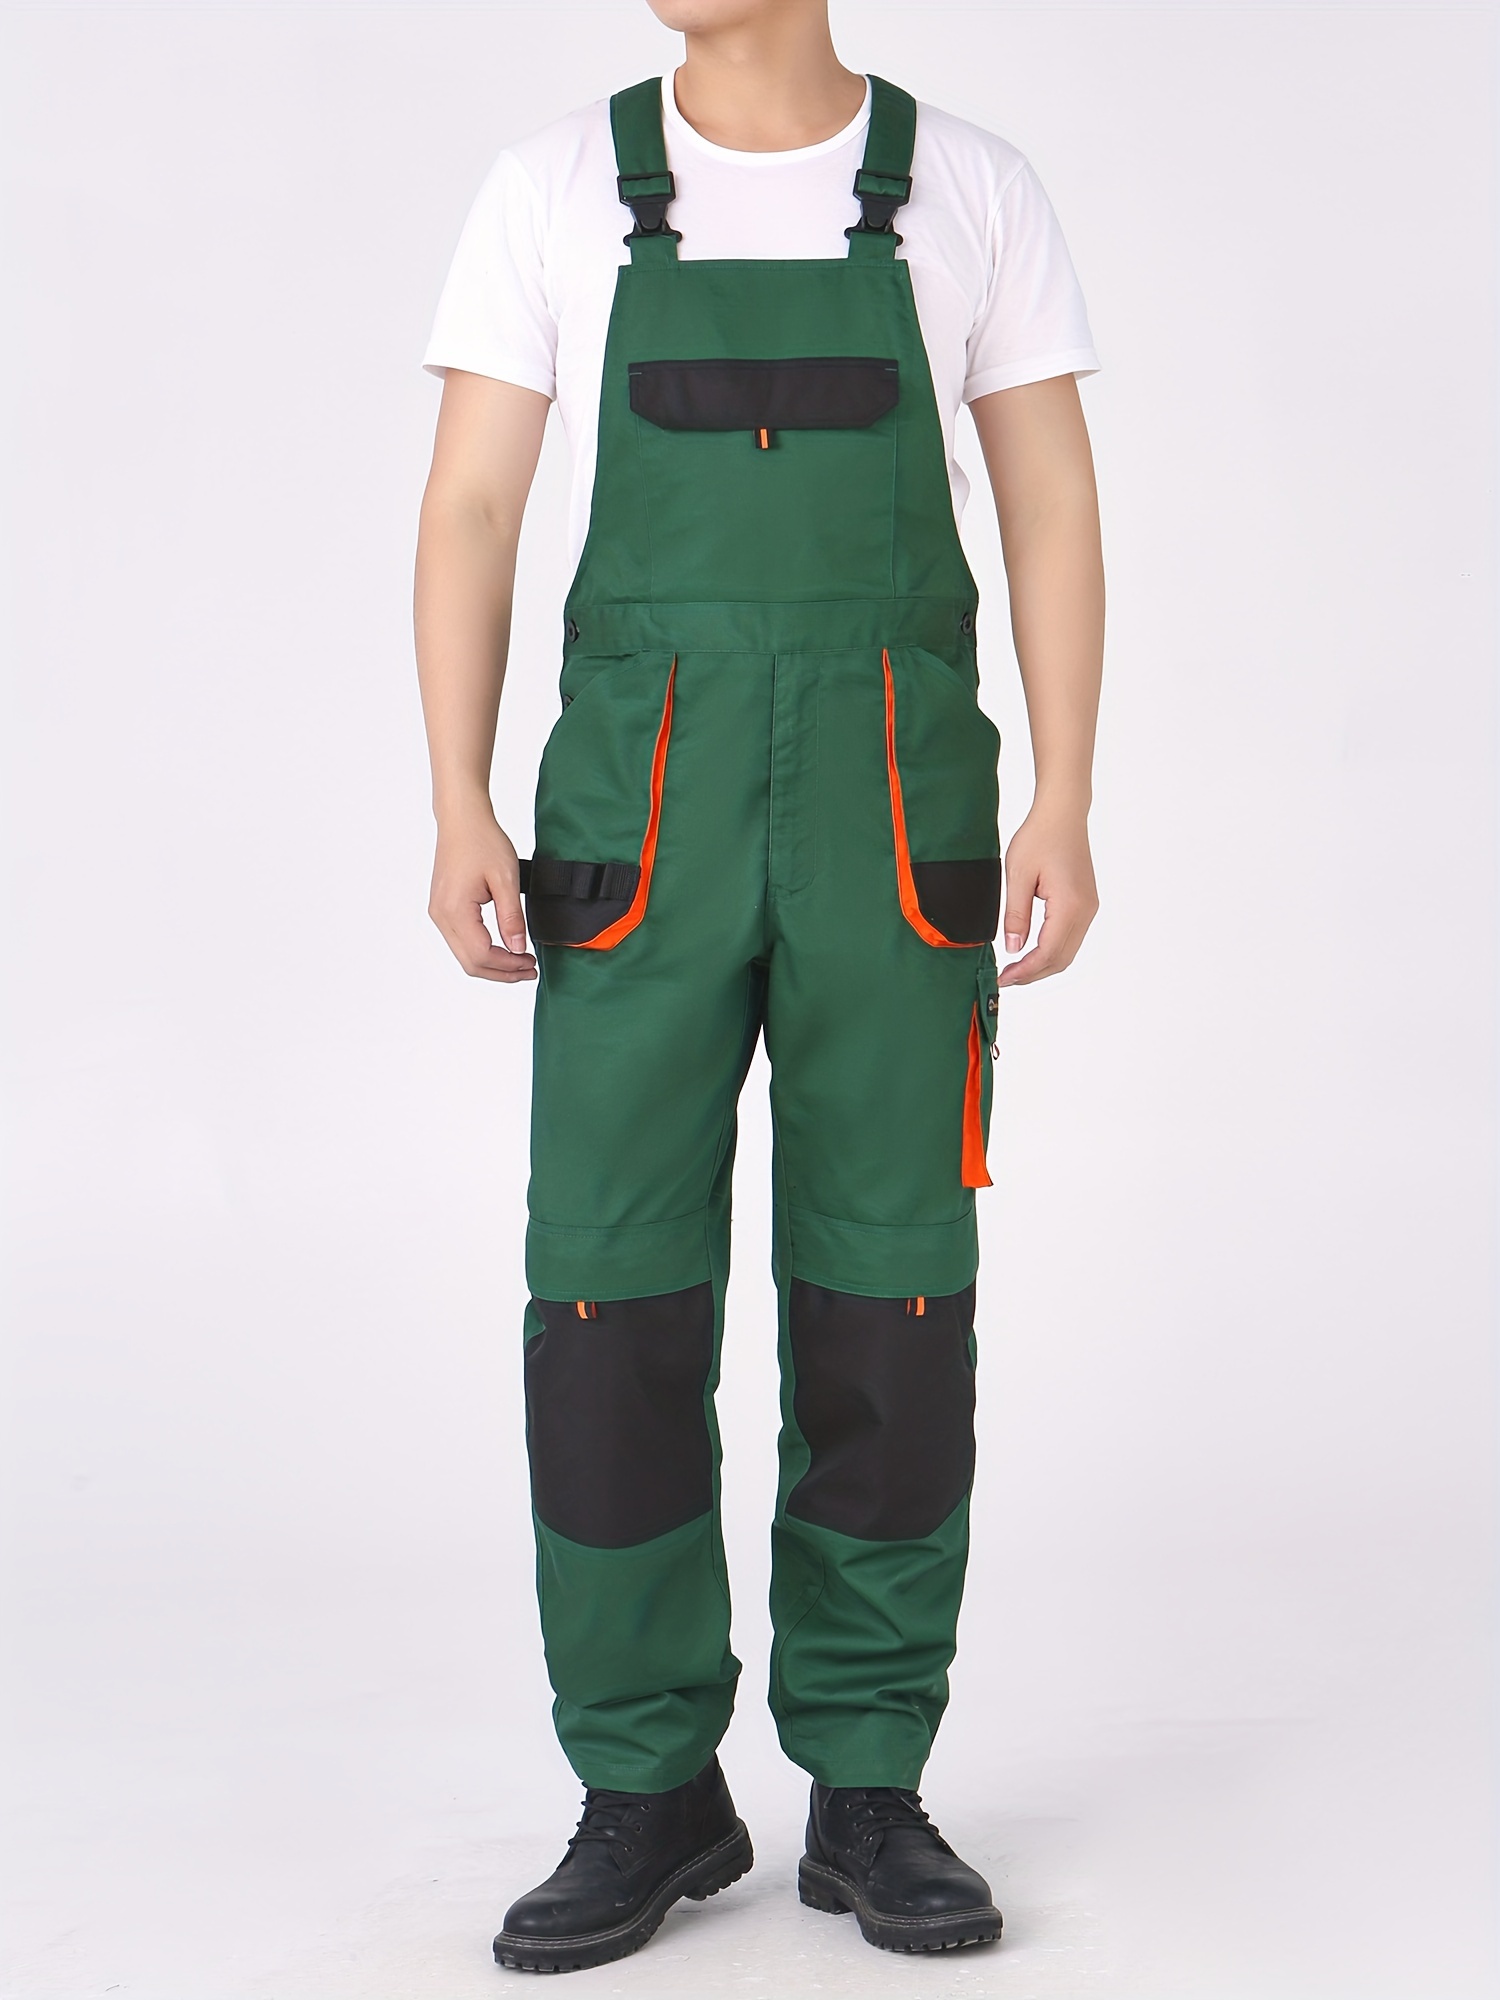 Casual Fashion Men Rompers Jumpsuit One Piece Overalls Cotton Mens